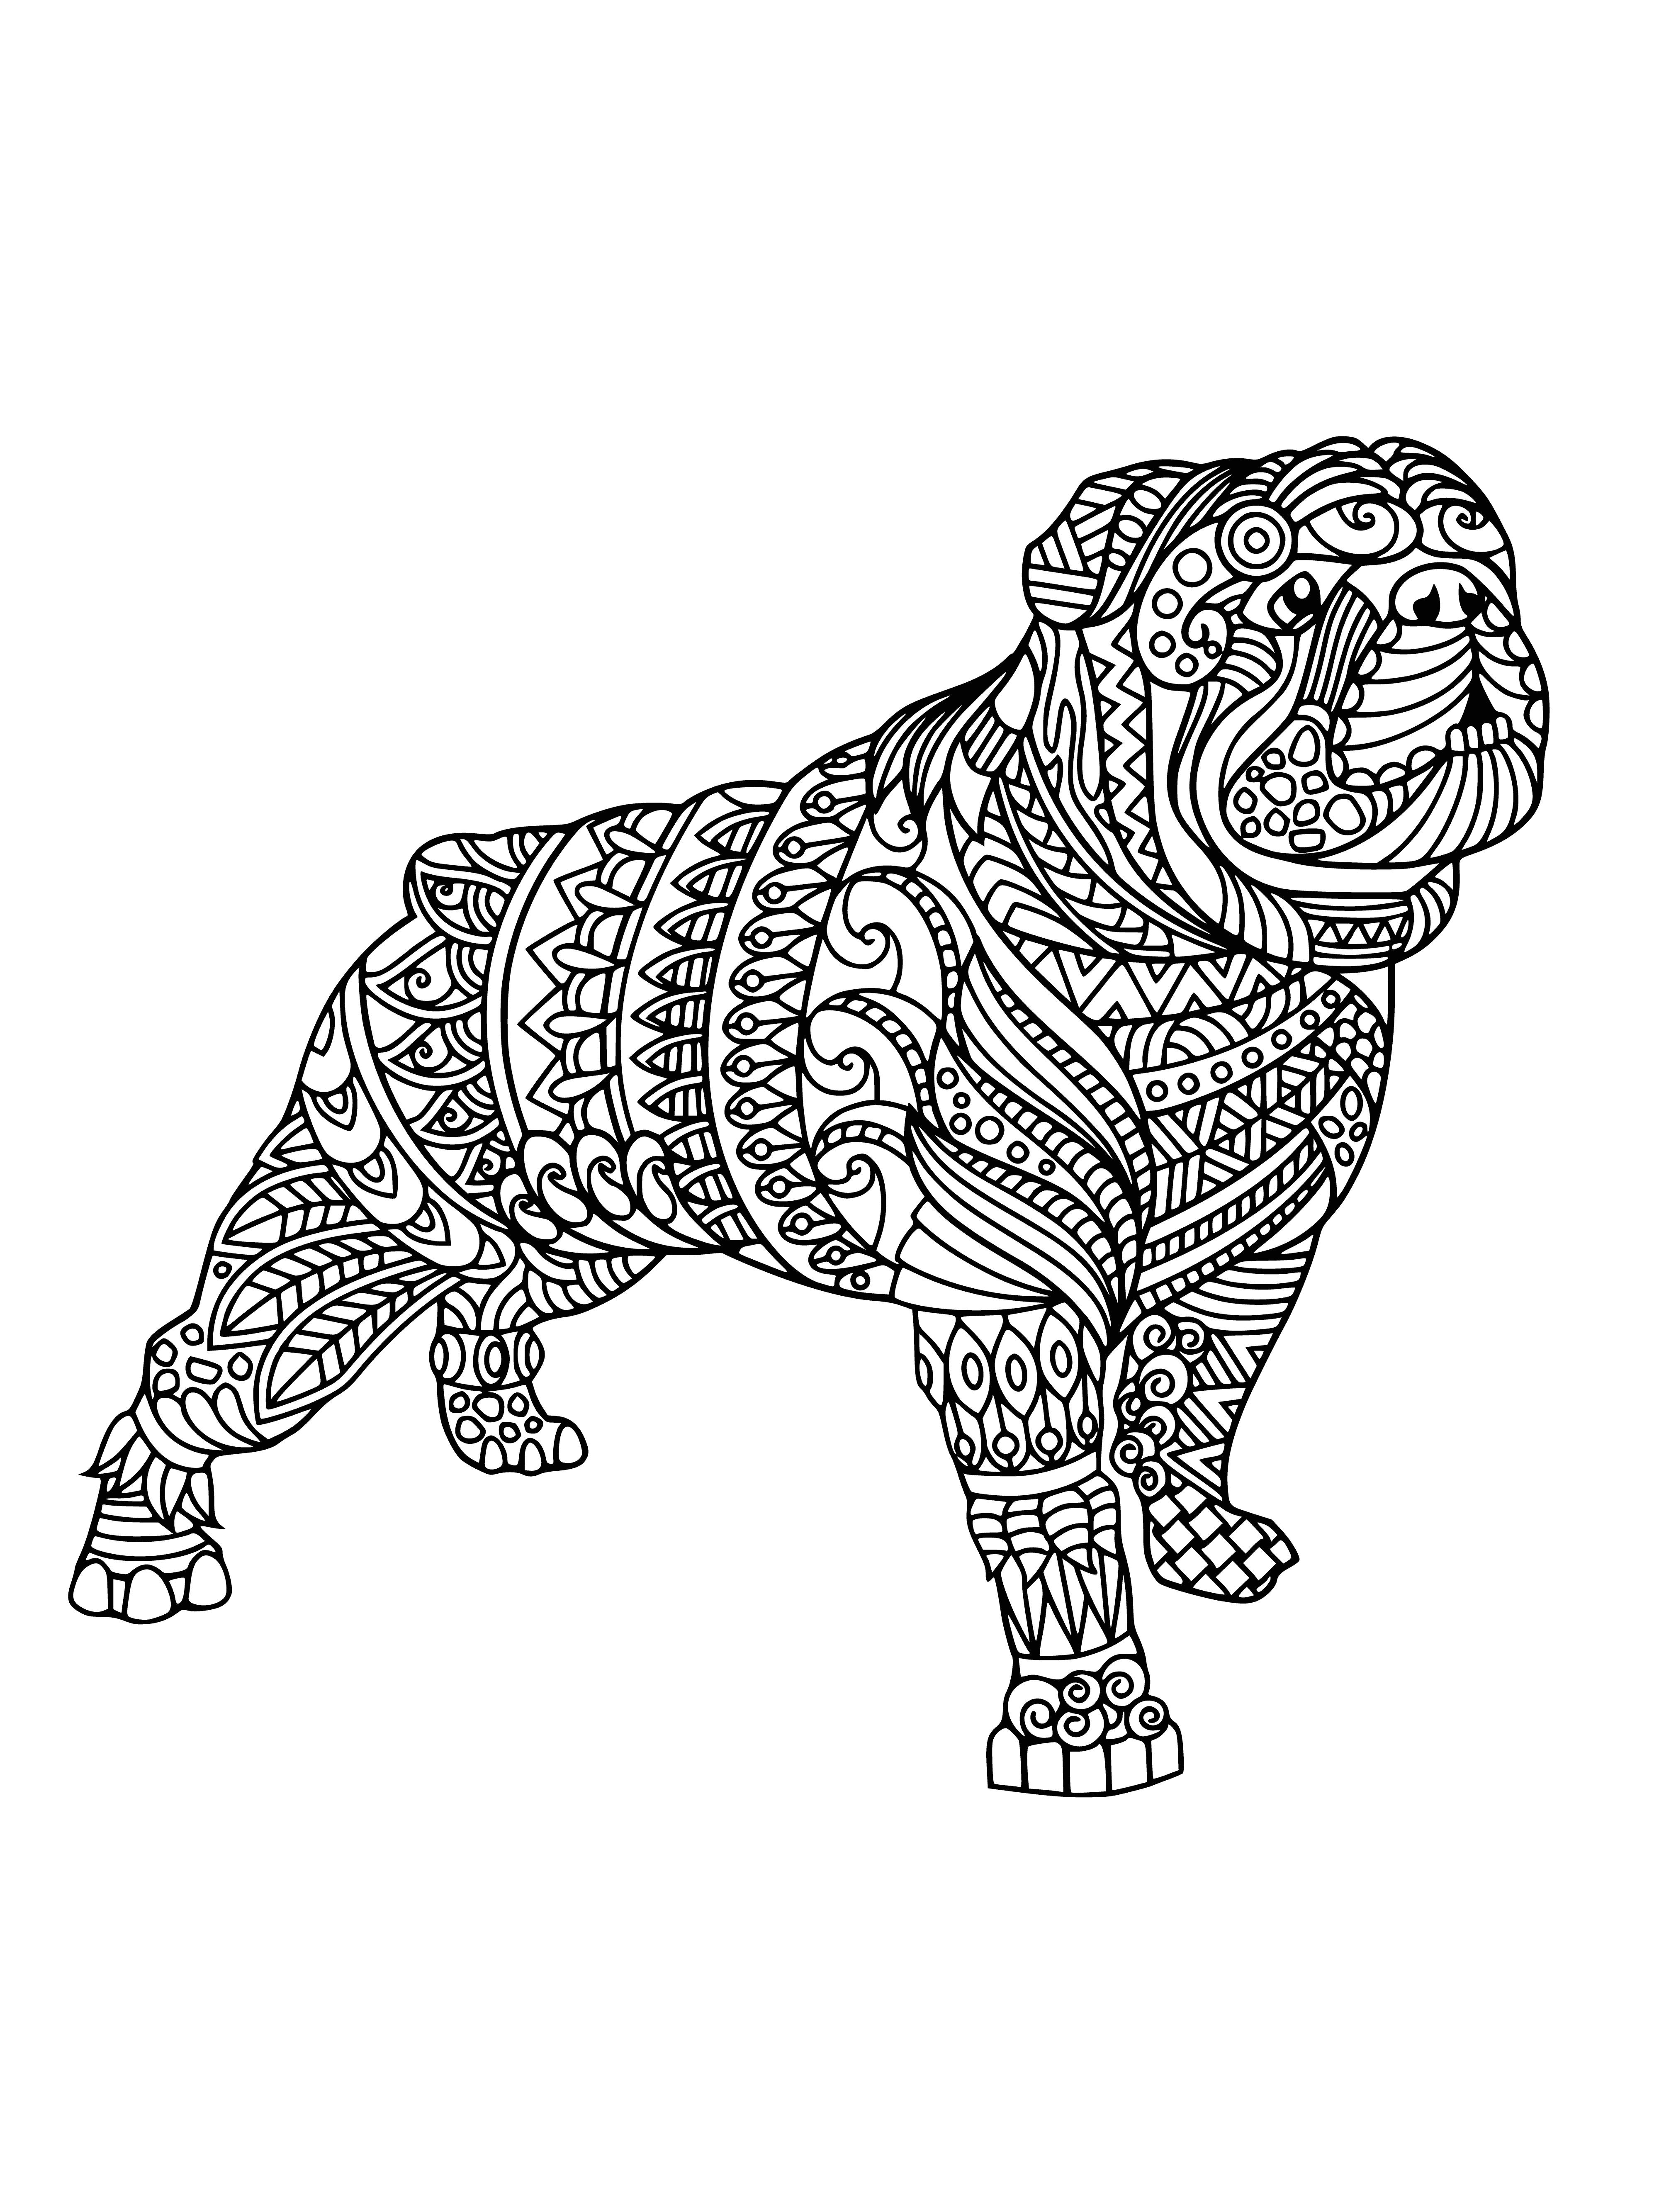 coloring page: White-brown mix dog stands in grassy field with short muzzle, stocky build, floppy ears, and tongue out.